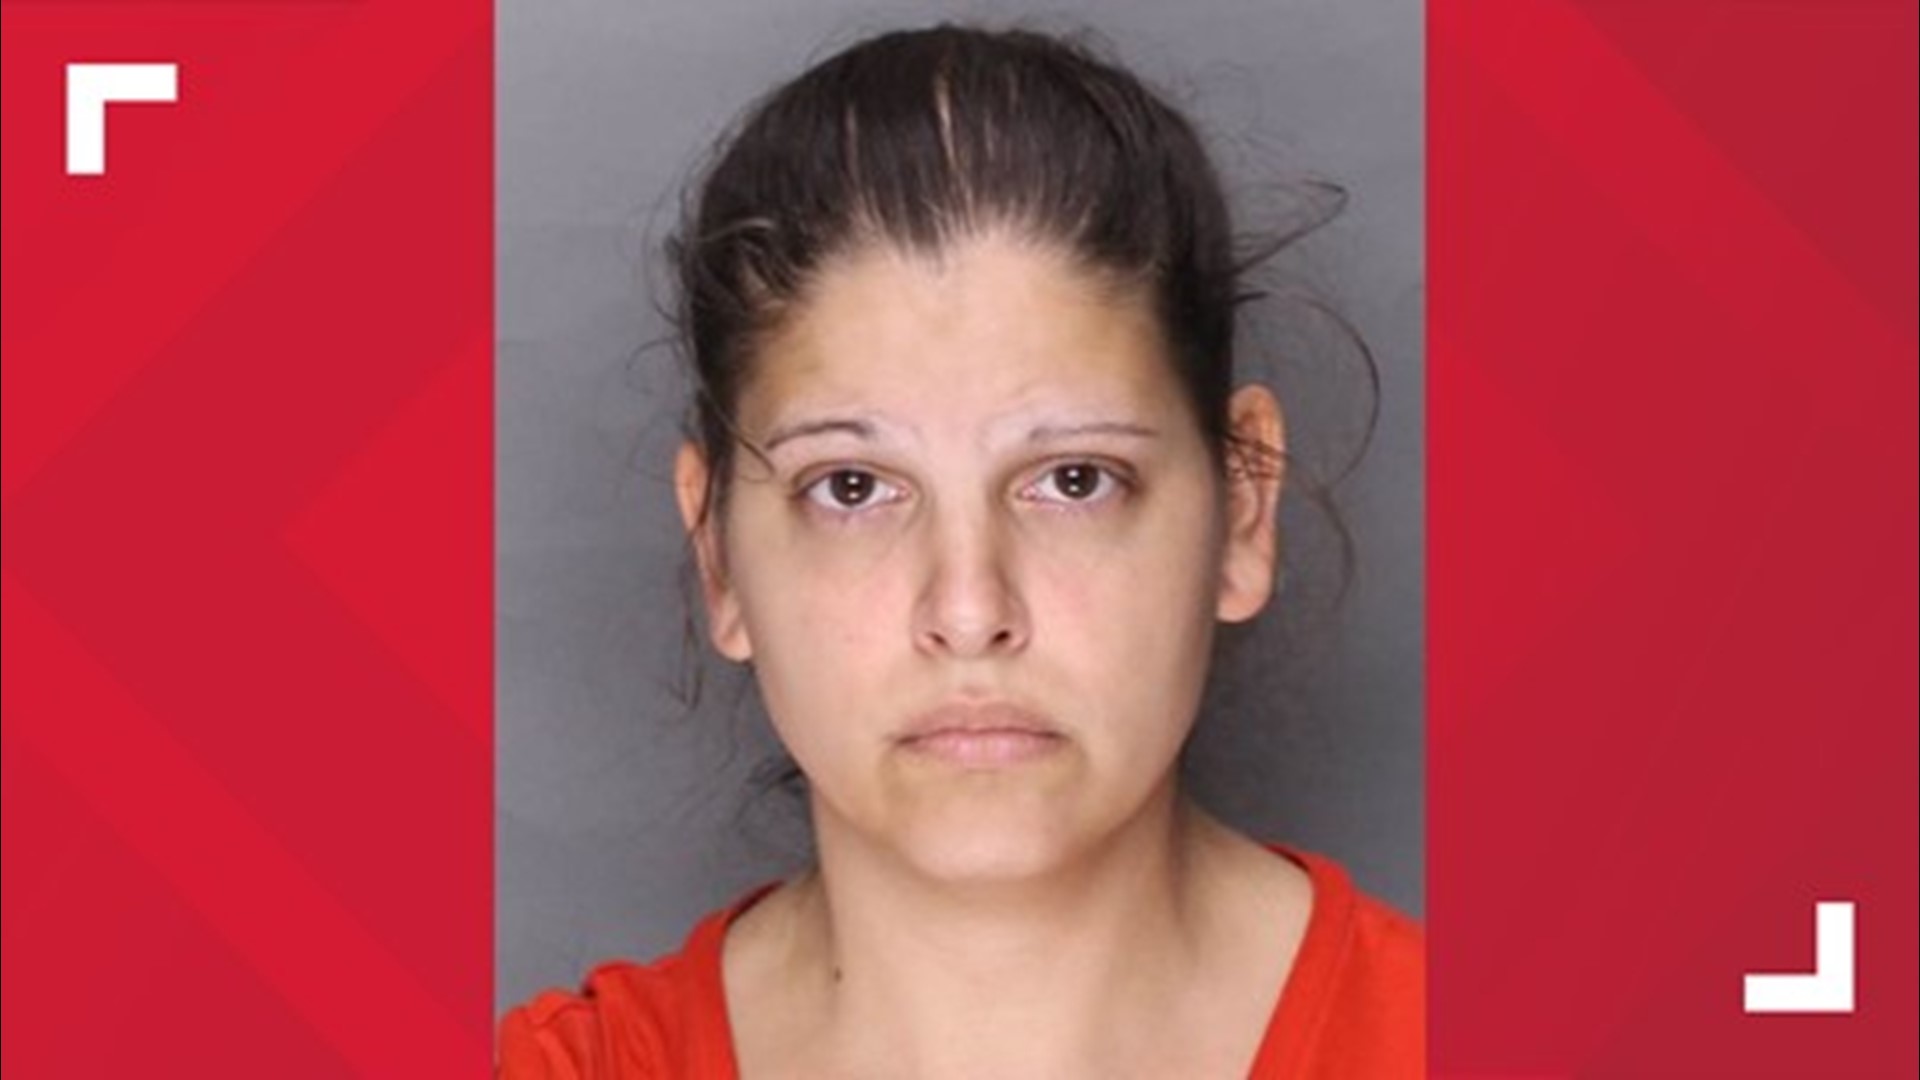 Kimberly Maurer, 37, was sentenced to life in prison after being convicted of starving, torturing, and killing her 12-year-old stepson in May 2020.